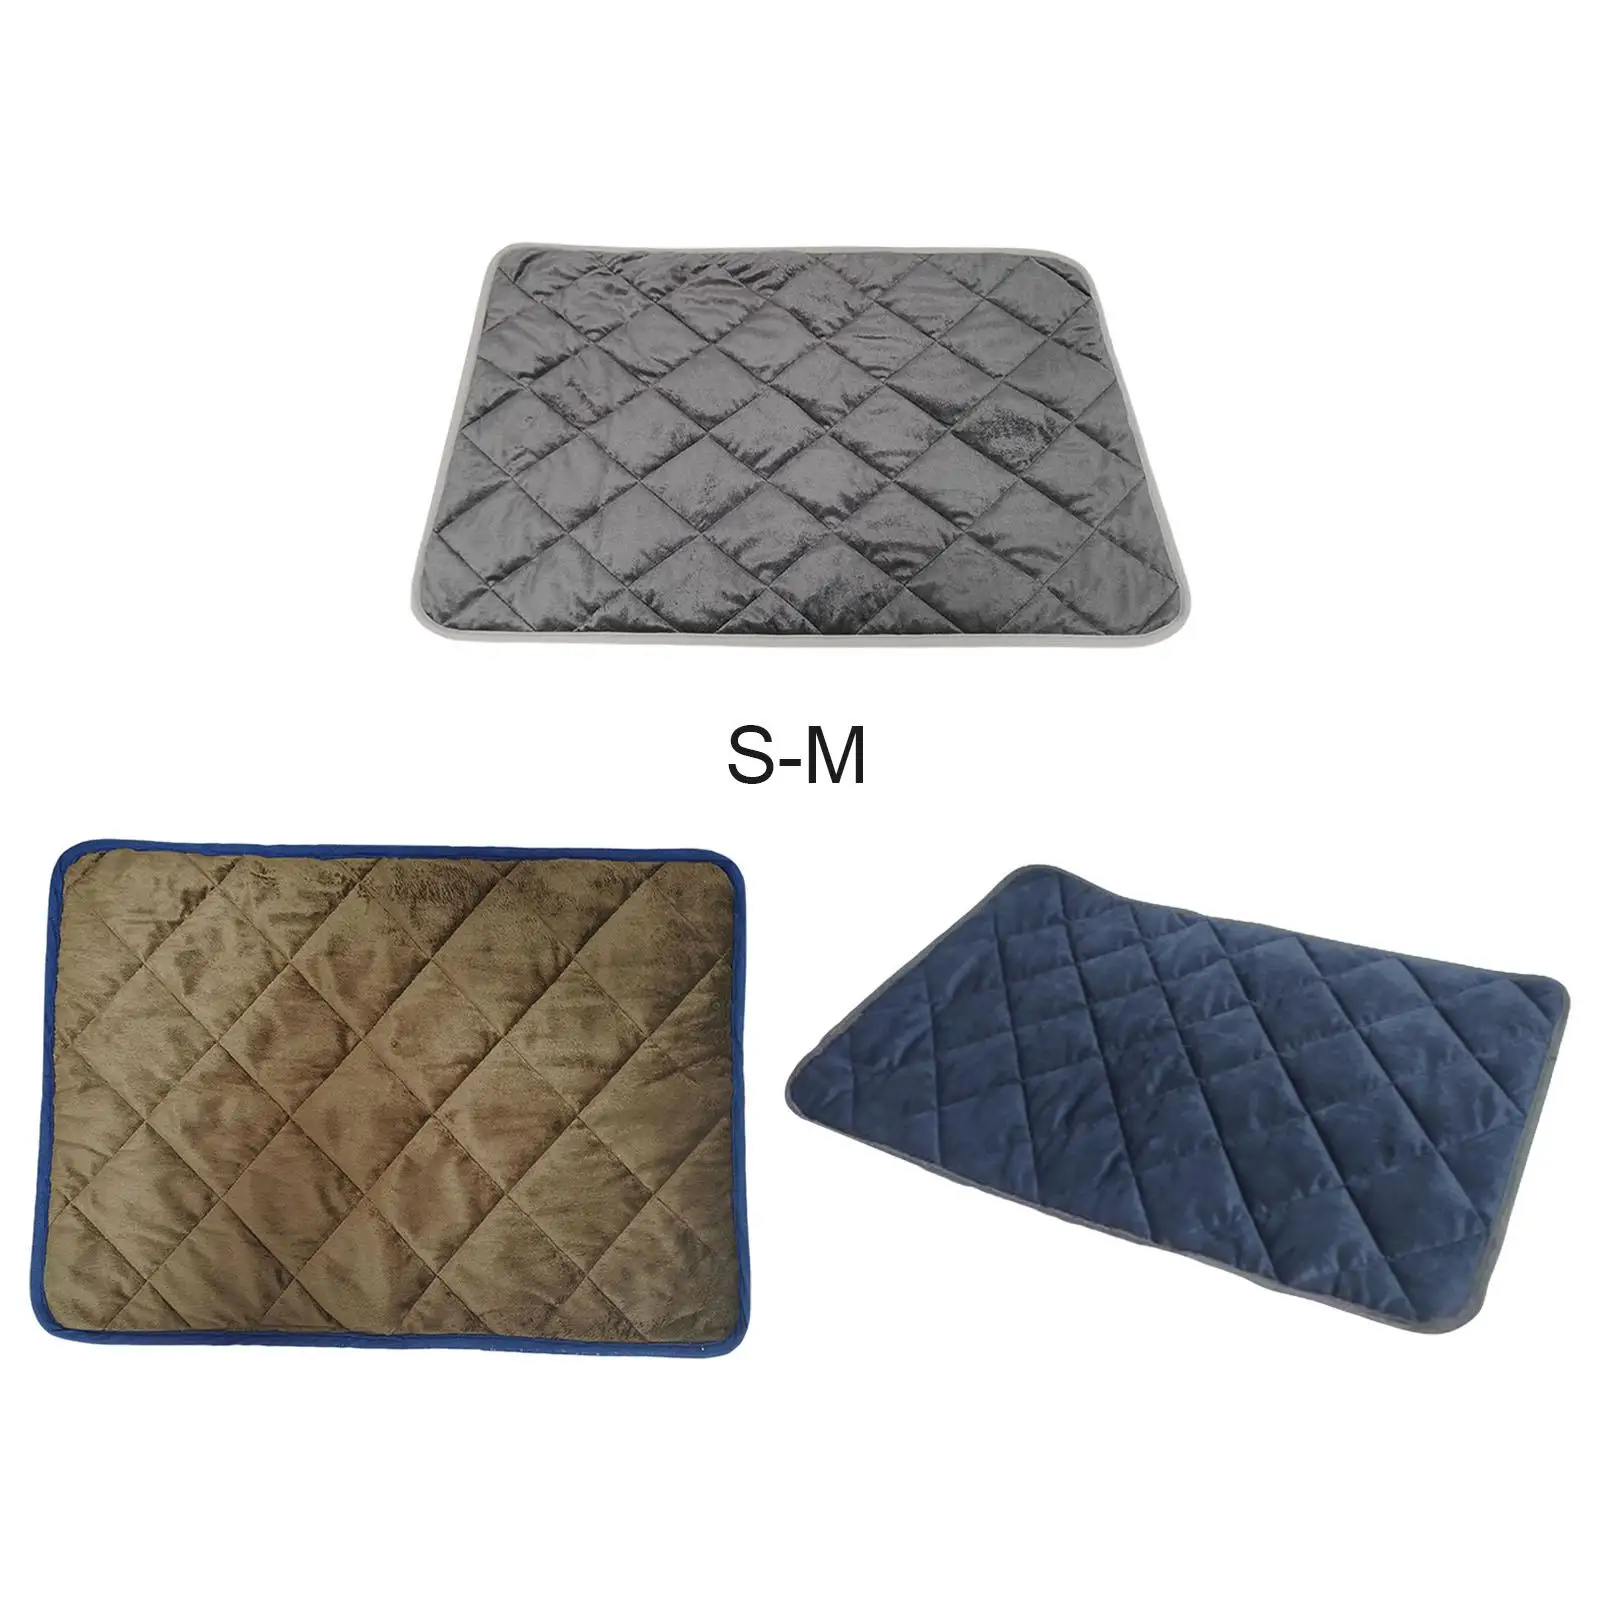 Self Heating Pets Pad Dogs Cat Sleeping Mat Safety Self Warming Mat Cushion Crate Blanket for Kitten Kitty Outdoor Indoor Puppy